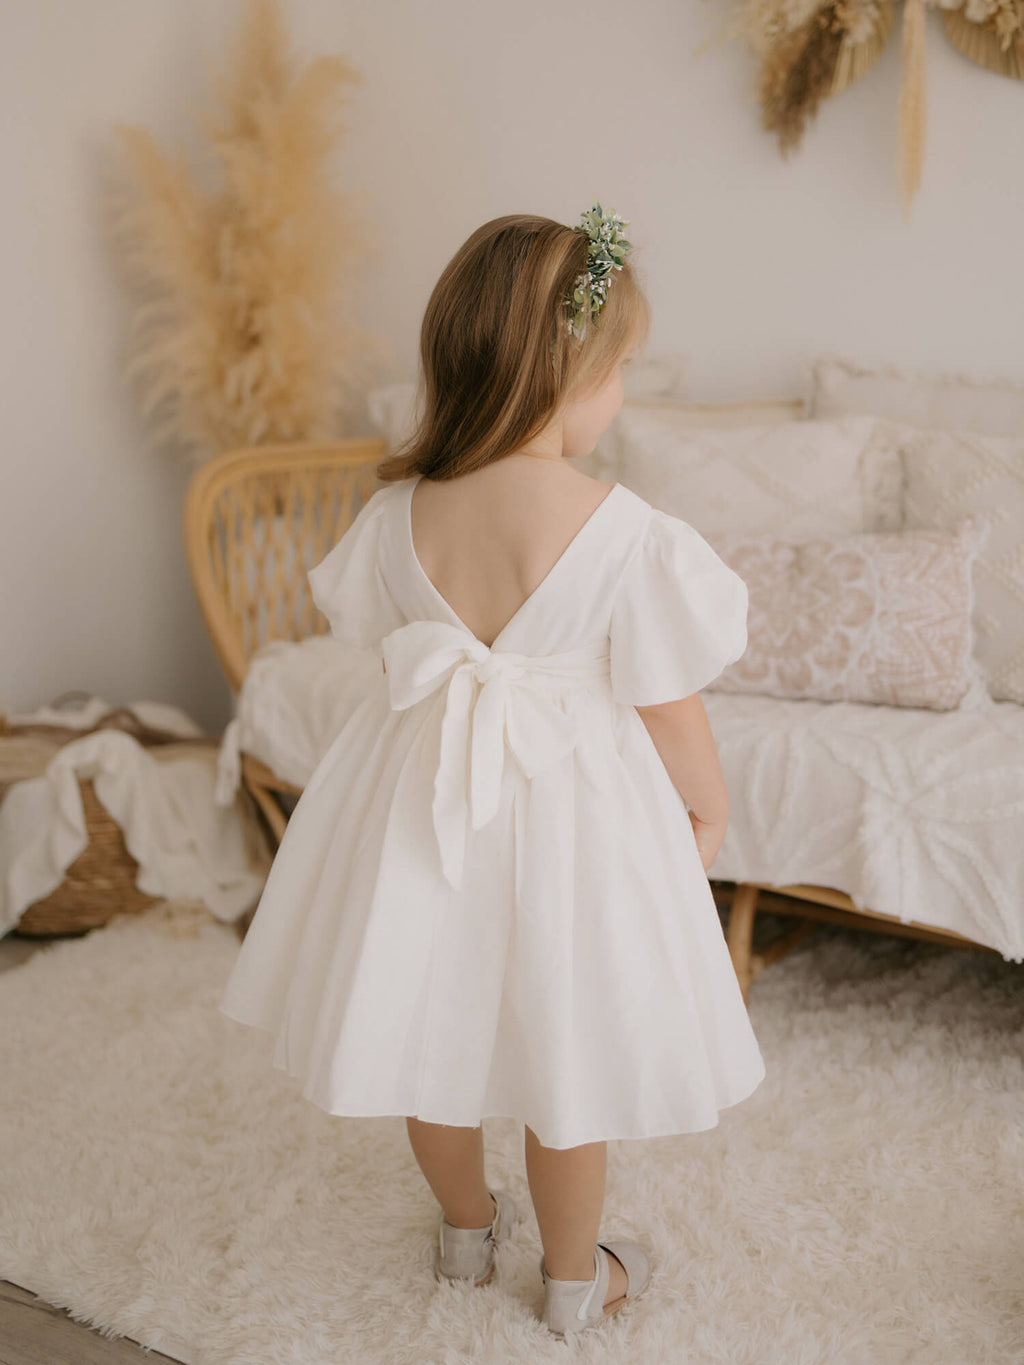 Cleo linen puff sleeve flower girl dress is worn by a young girl. she holds a flower girl basket and wears a floral wreath in her hair.